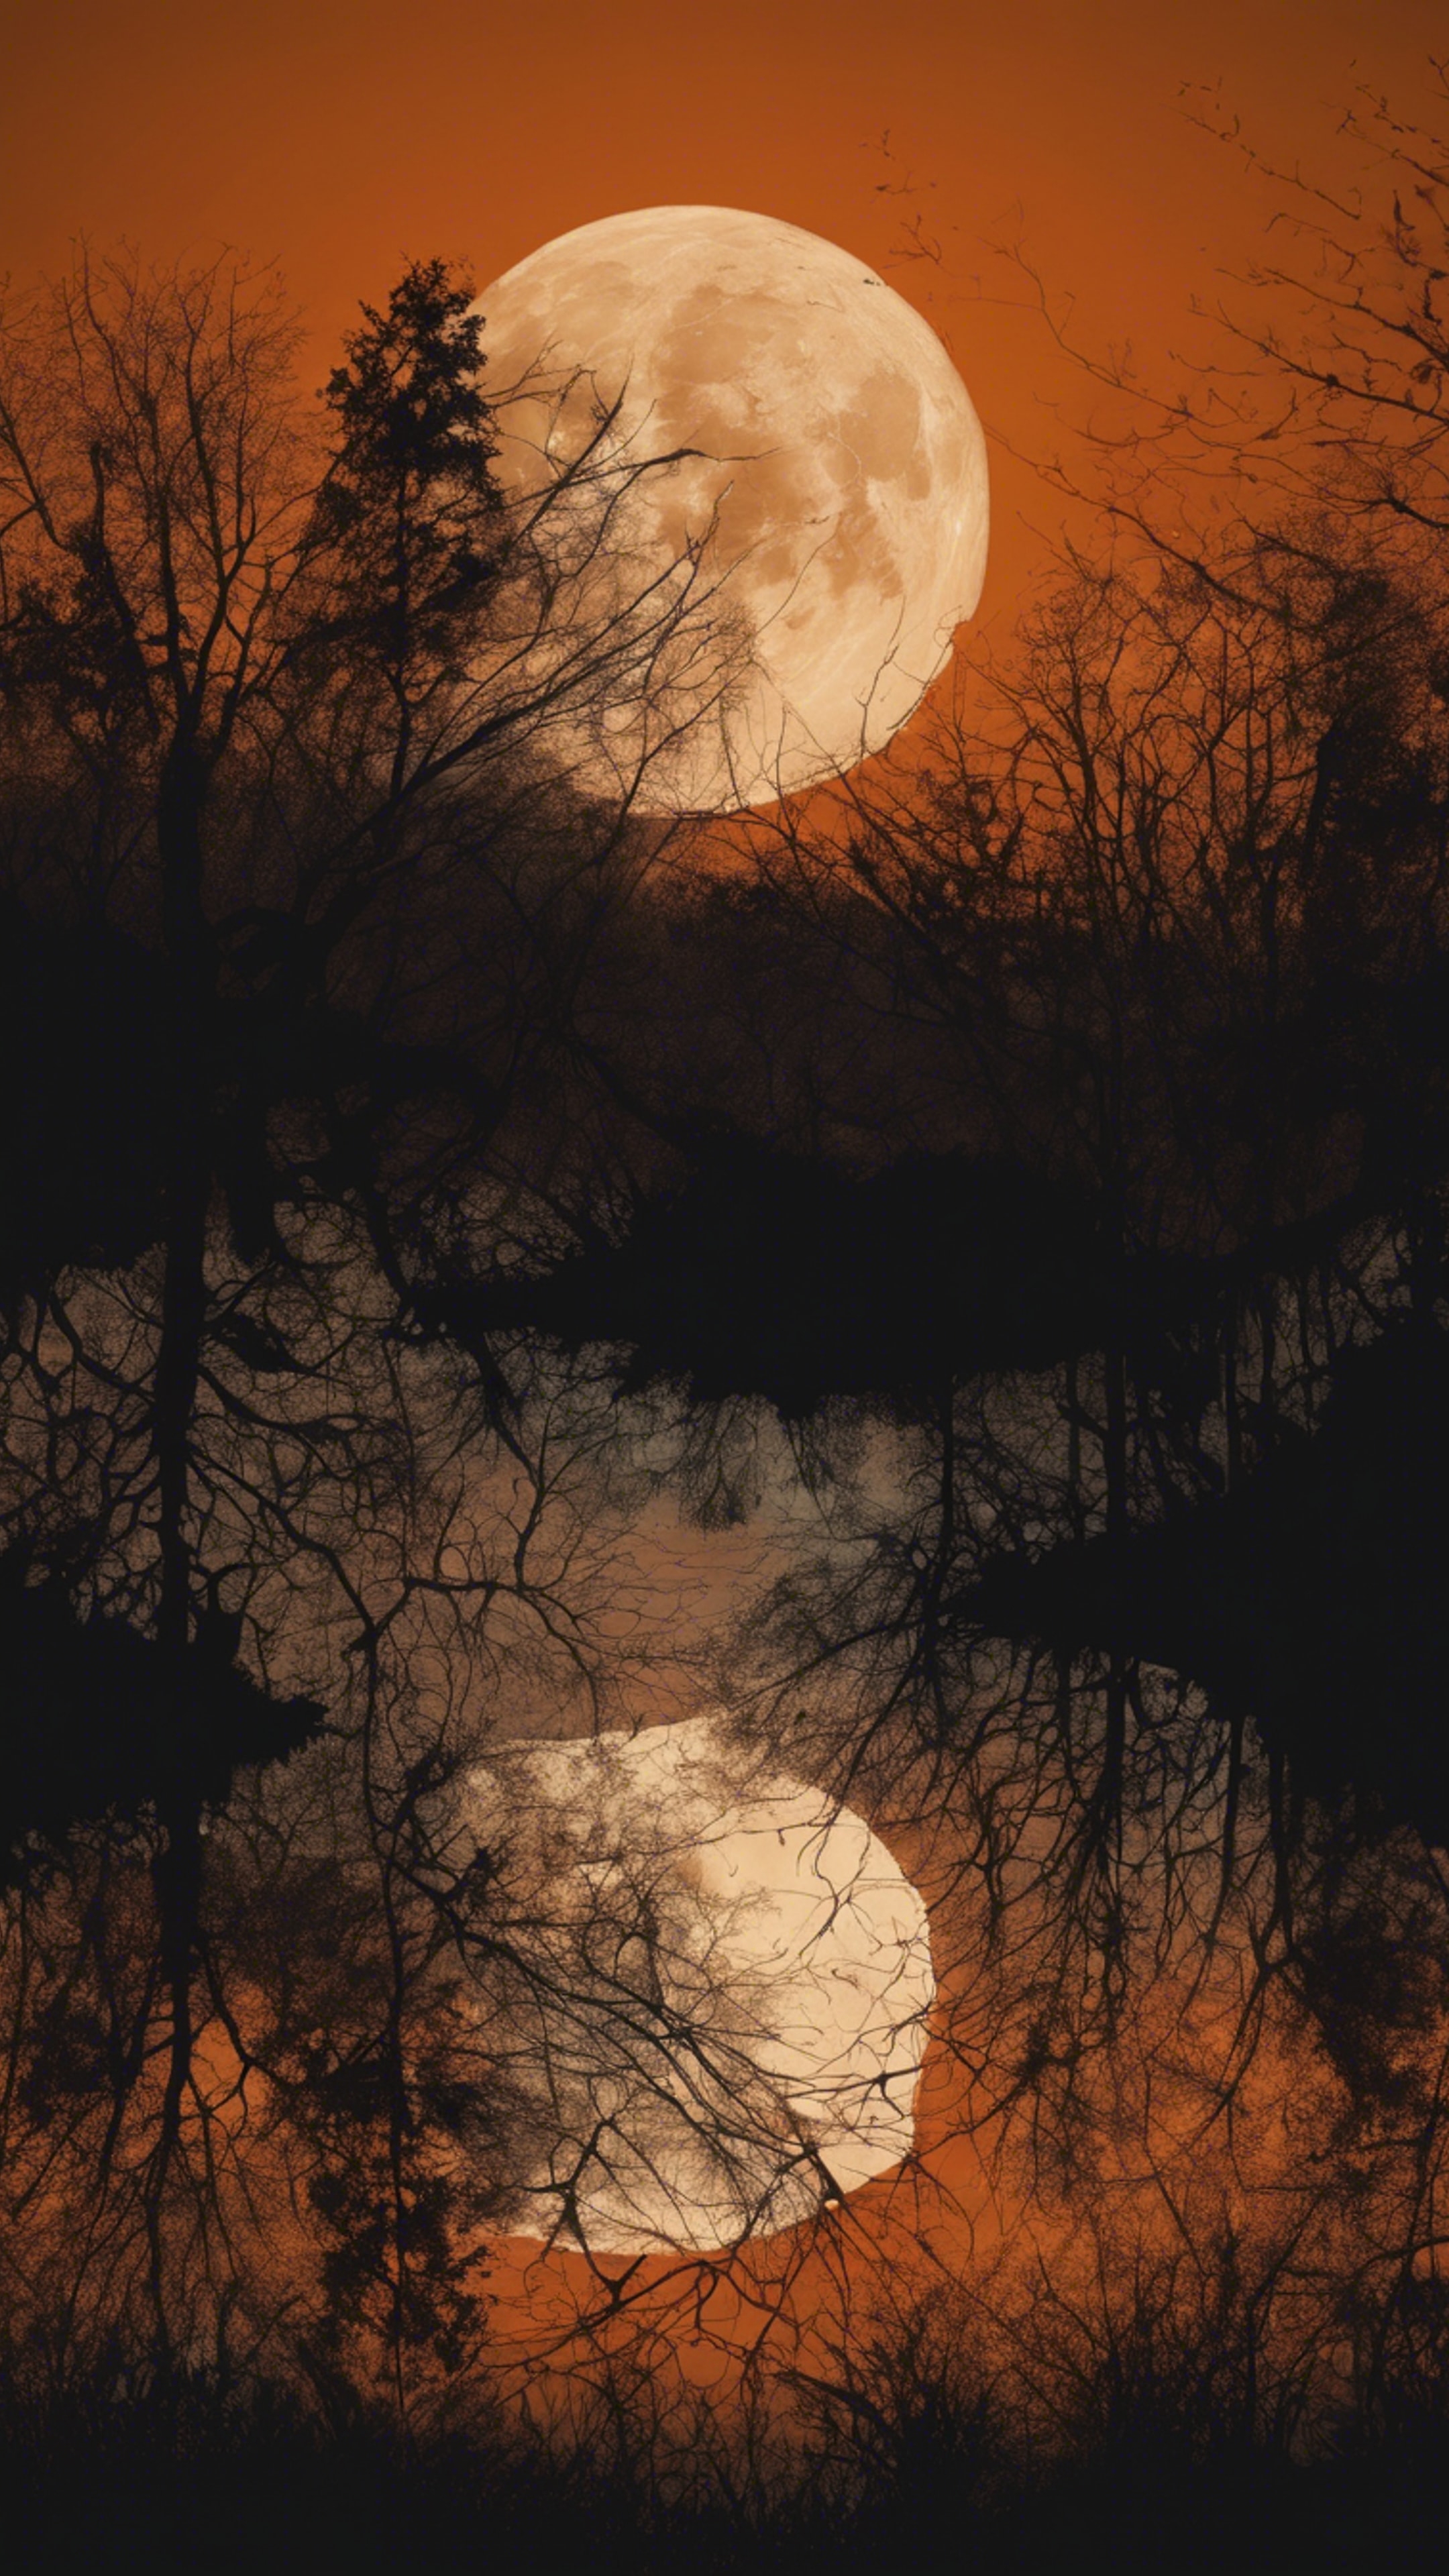 Gleaming full moon over black silhouetted forest contrasted by a deep orange sky.壁紙[d3ef8041818348d2b22b]